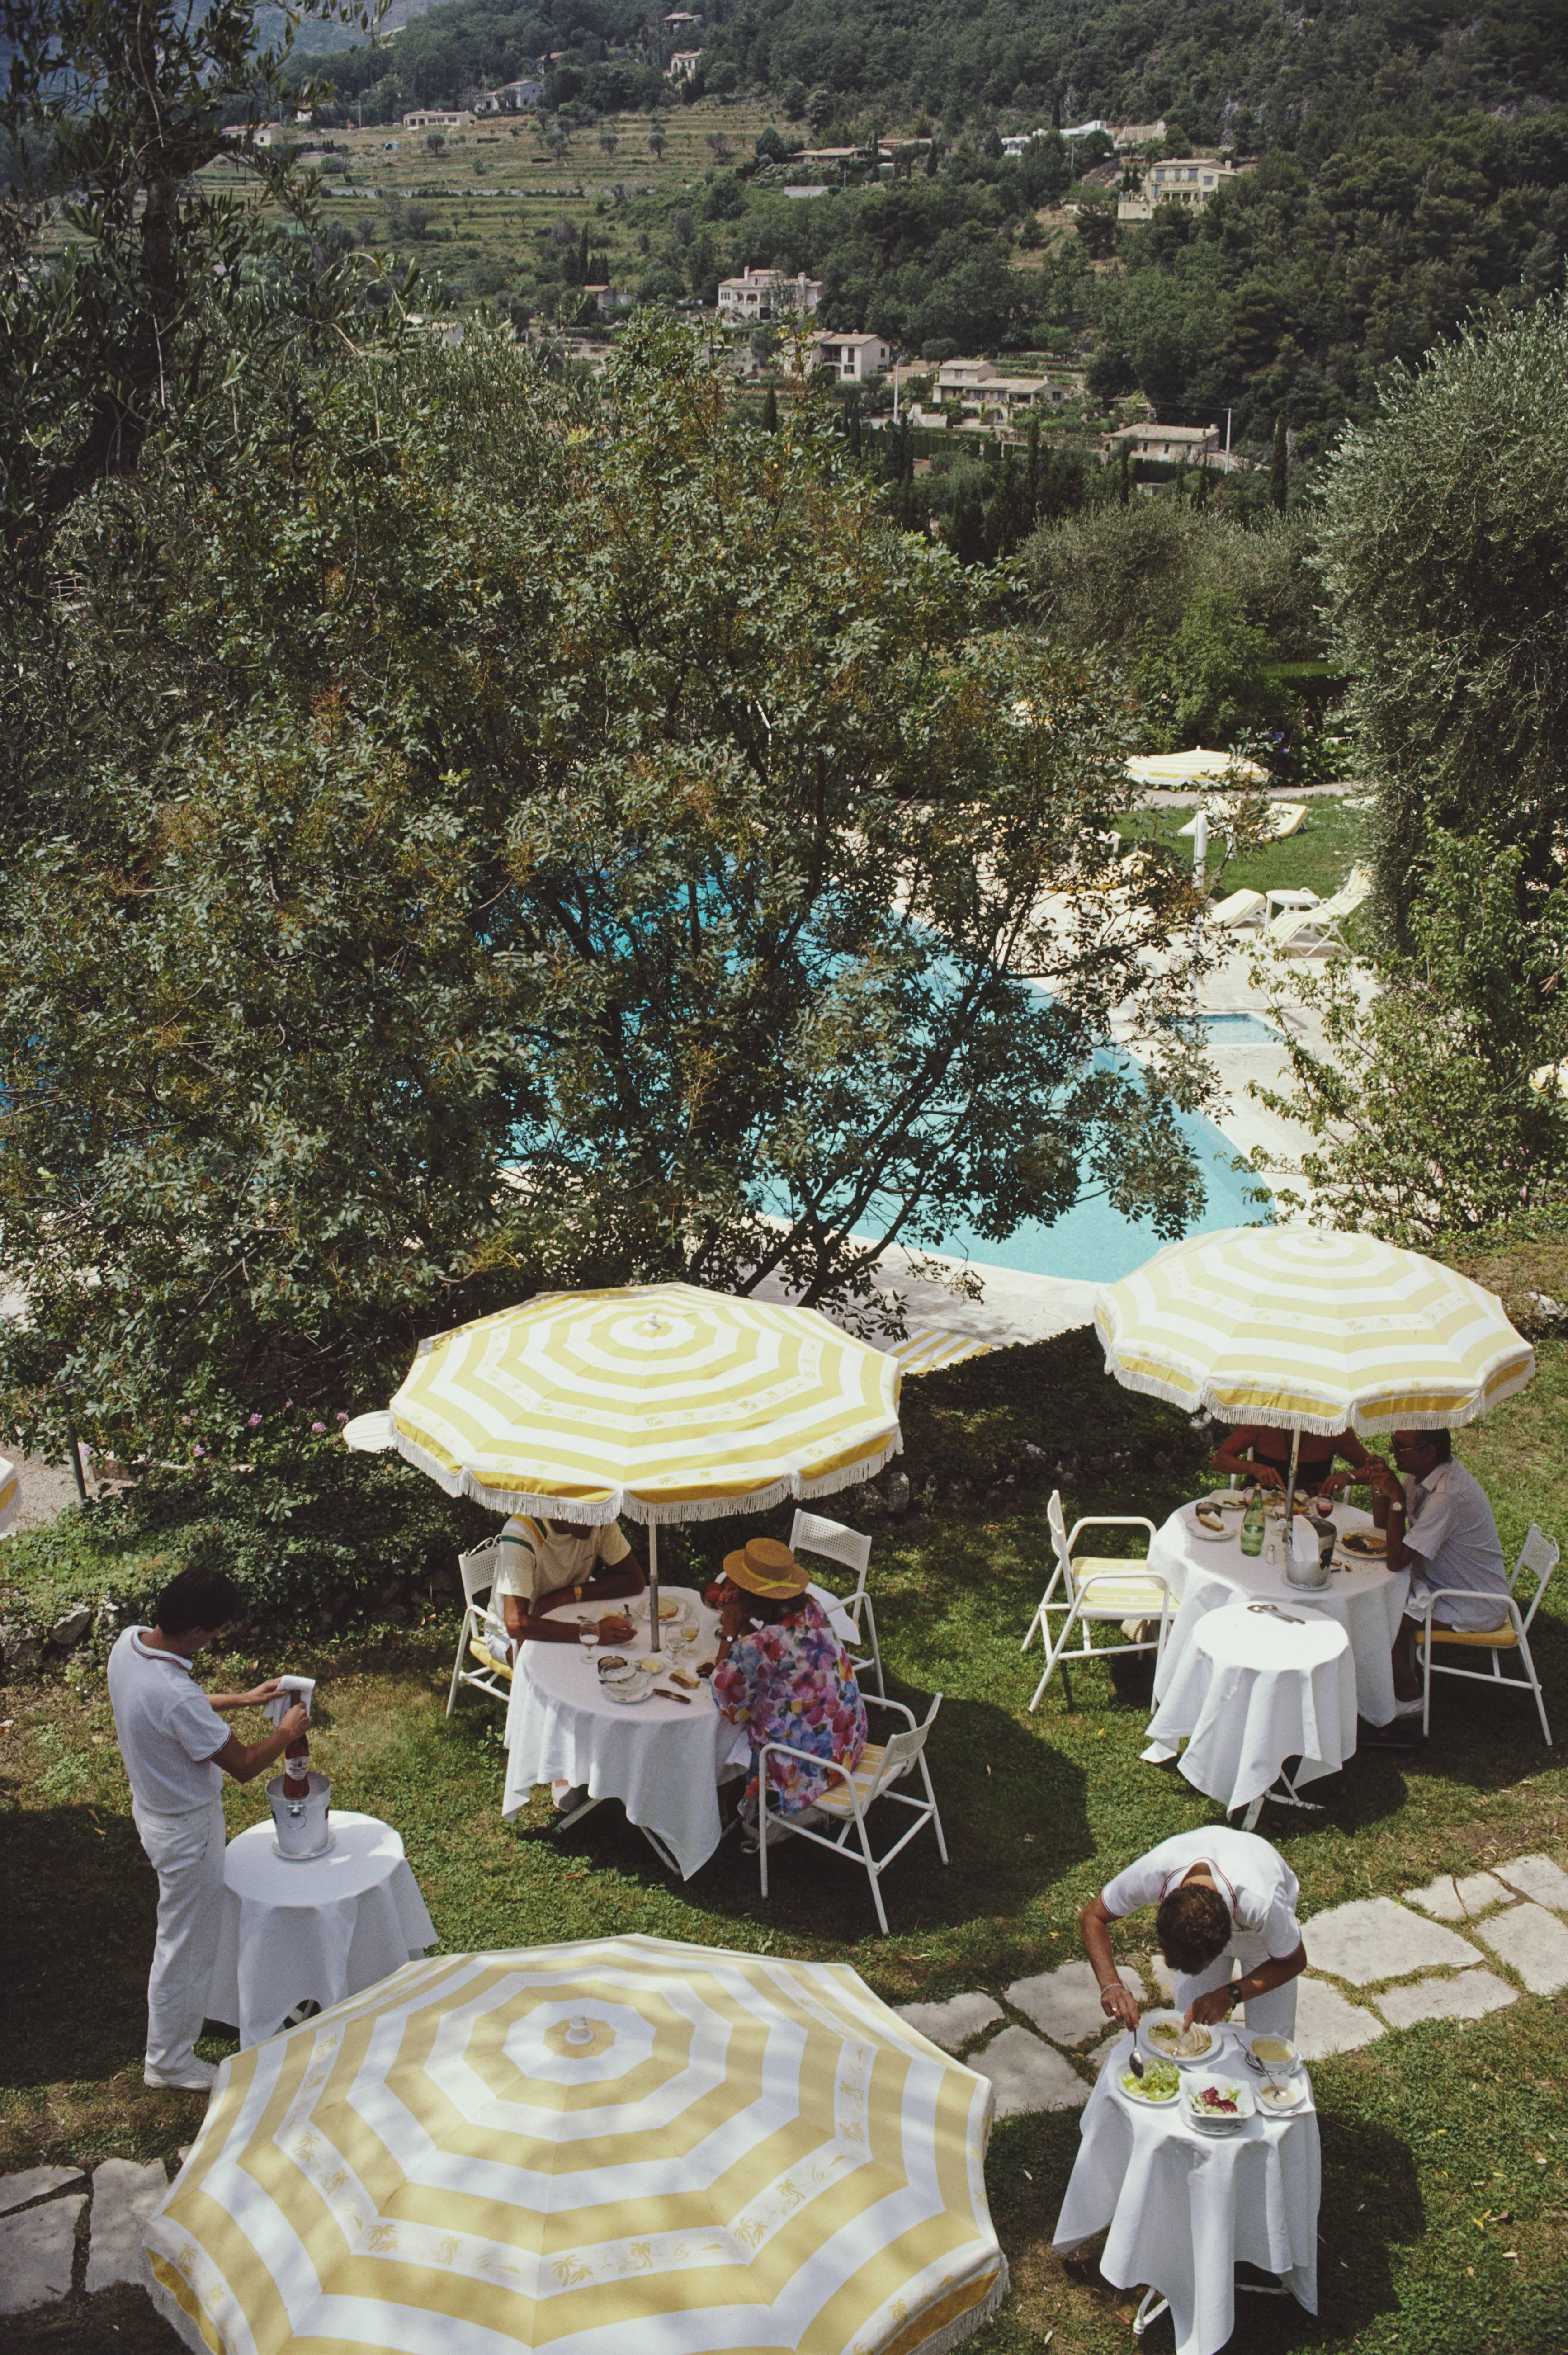 Slim Aarons Color Photograph - Chateau Saint-Martin (Estate Stamped Limited Edition) 12x16